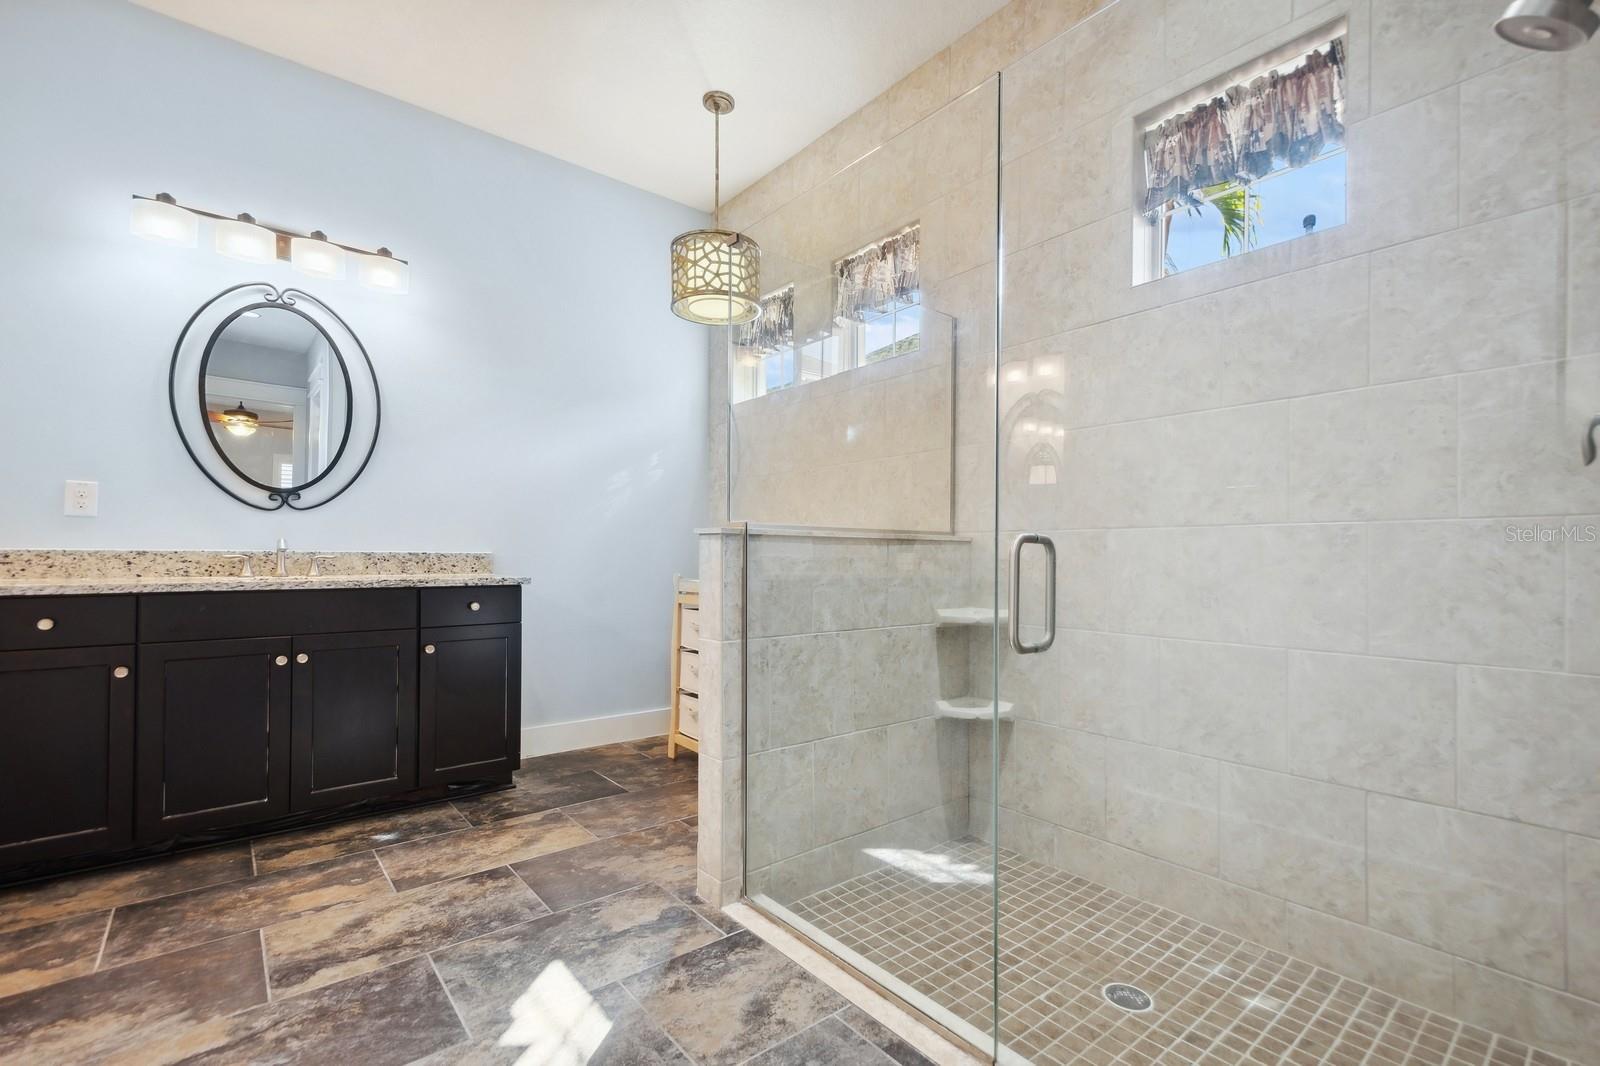 En-suite Bath with large walk in shower, plenty of cabinets for storage, and double sinks.